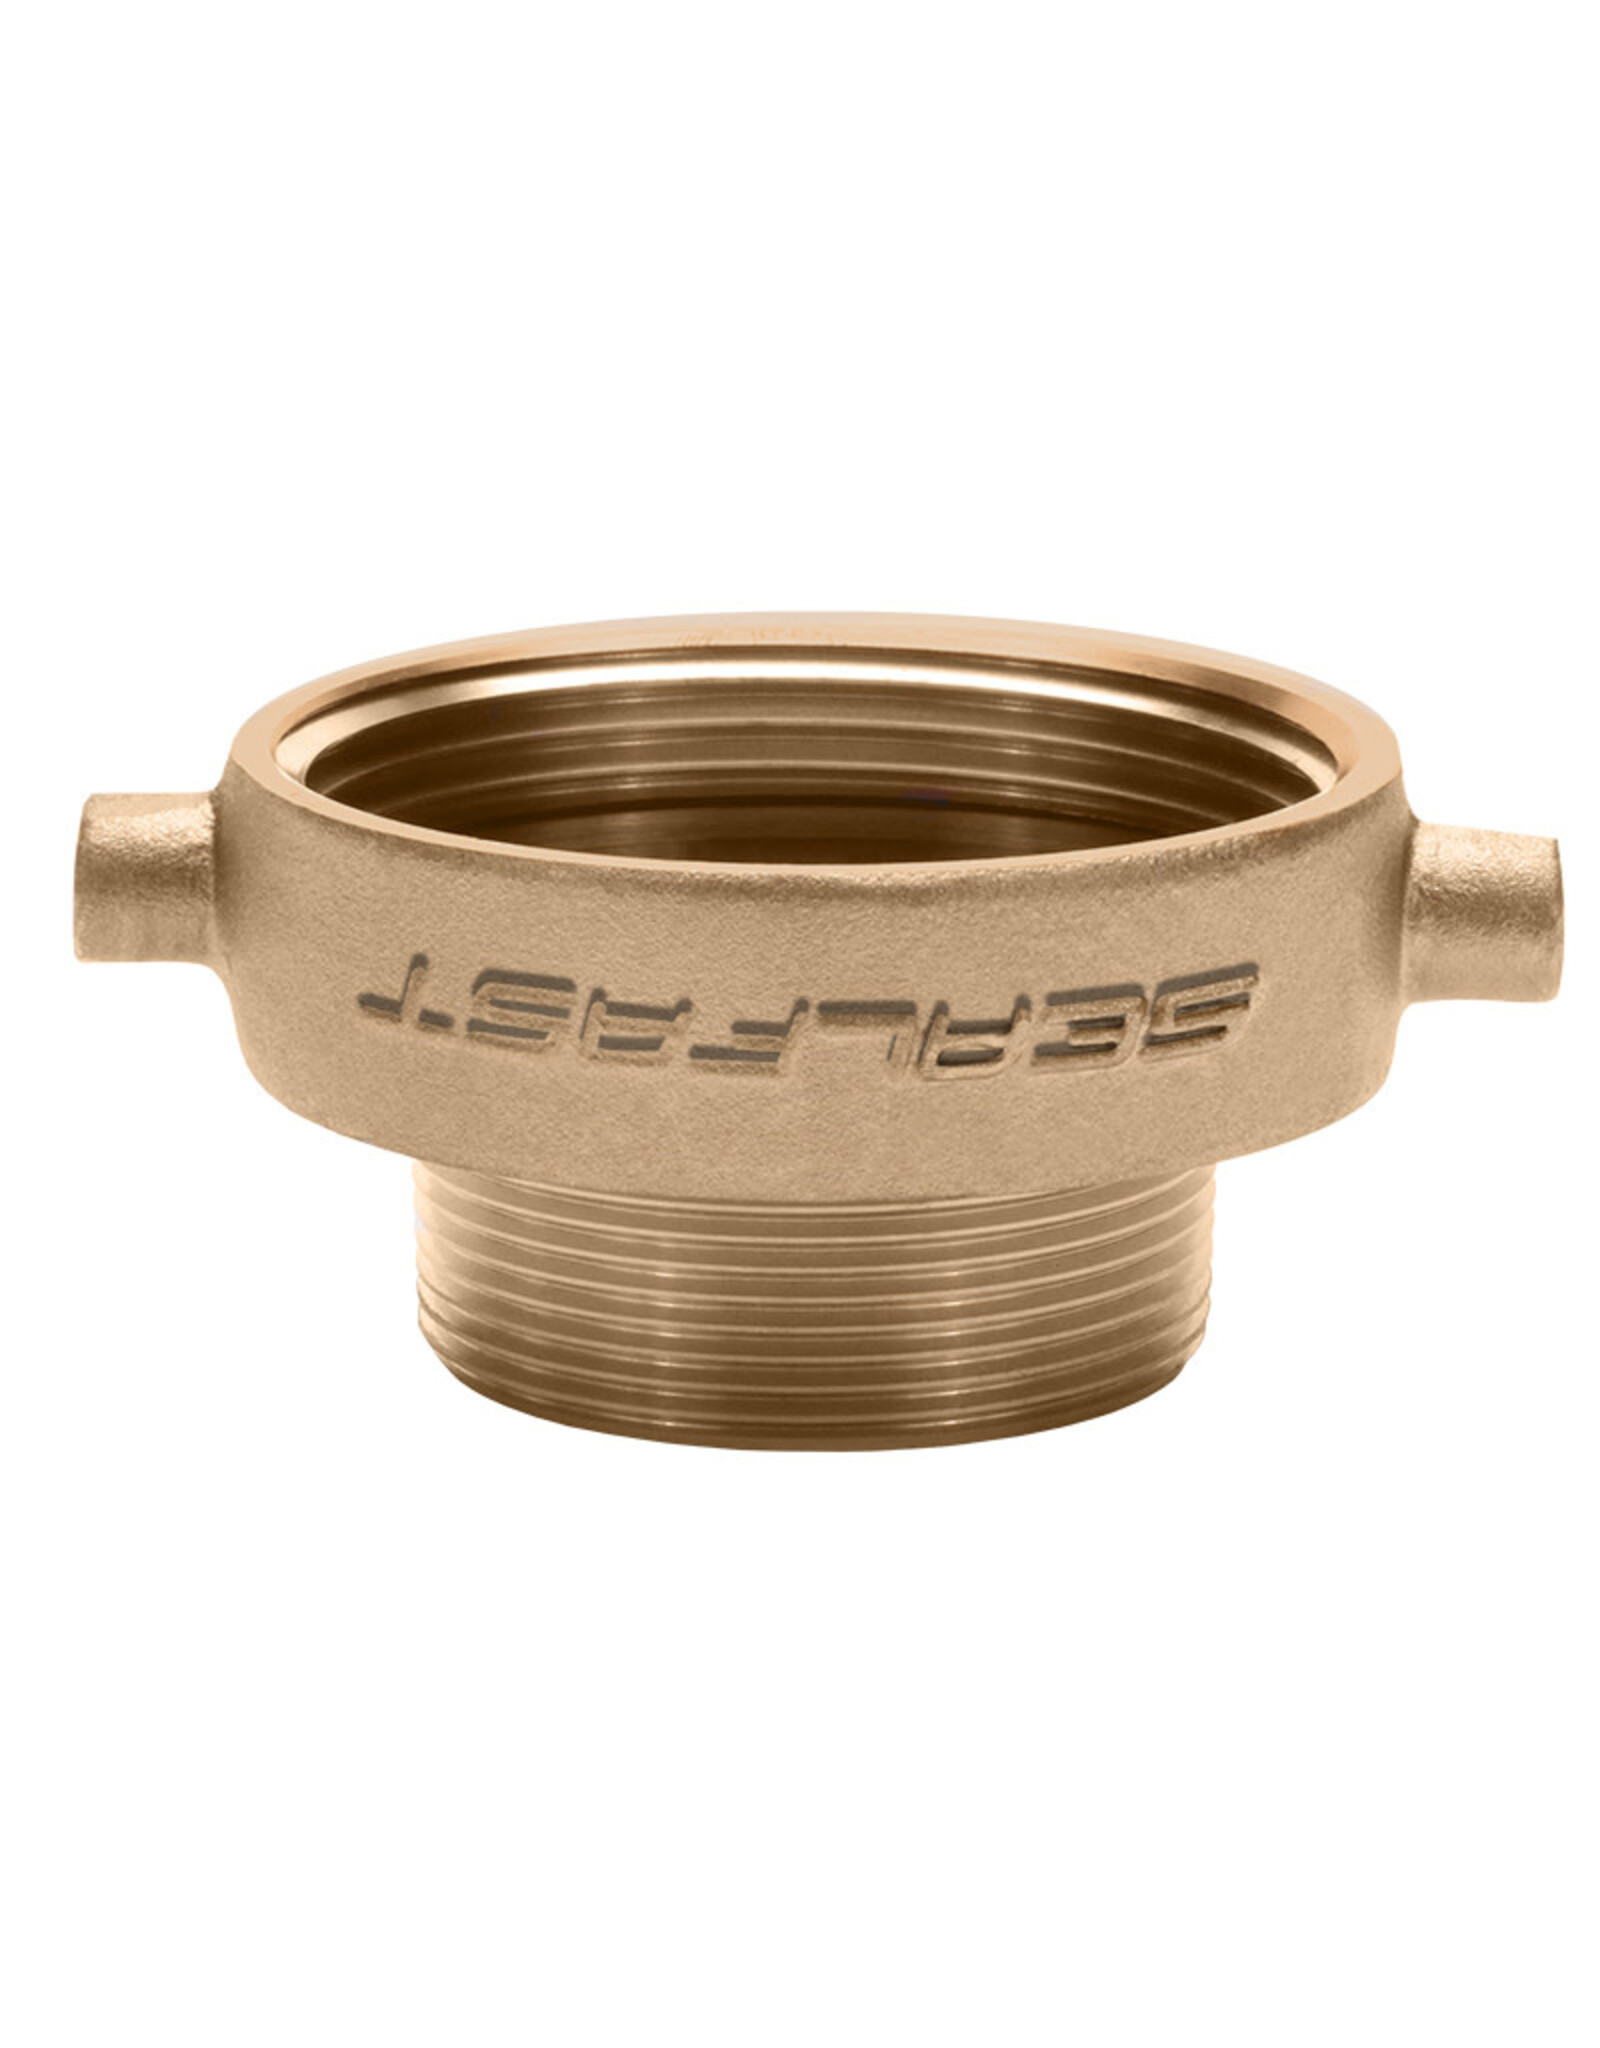 SEALFAST 2 1/2 Inch (in) FNST x 2 Inch (in) MNPT Brass Female x Male Reducer Adapter Fitting